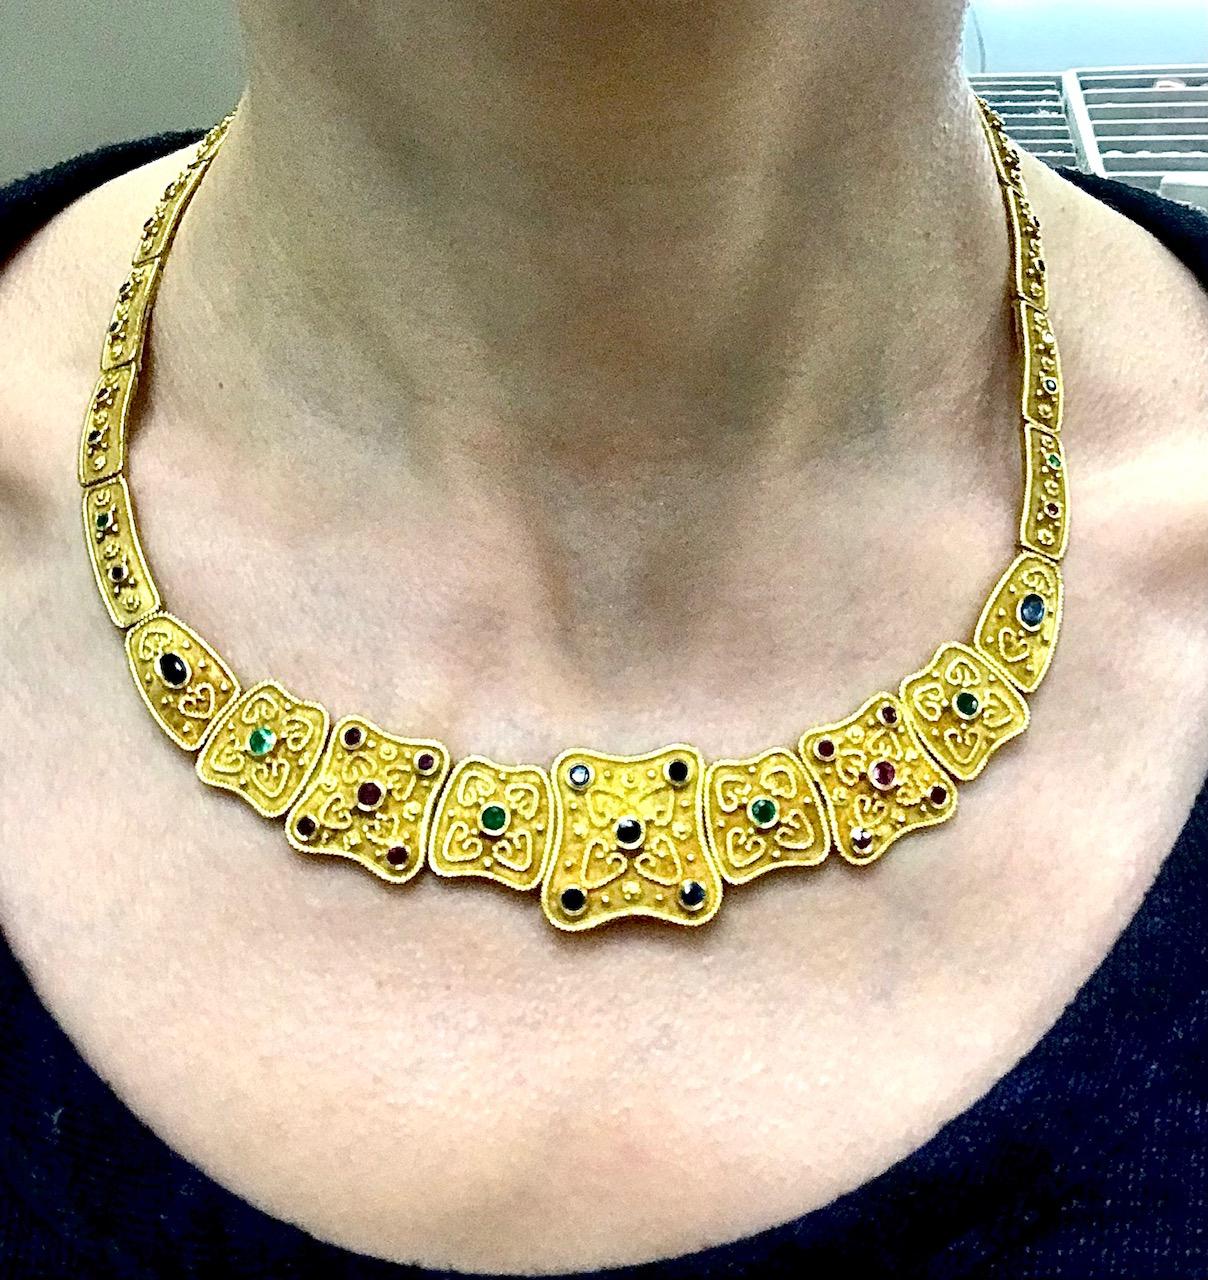 2 sovereign gold necklace designs